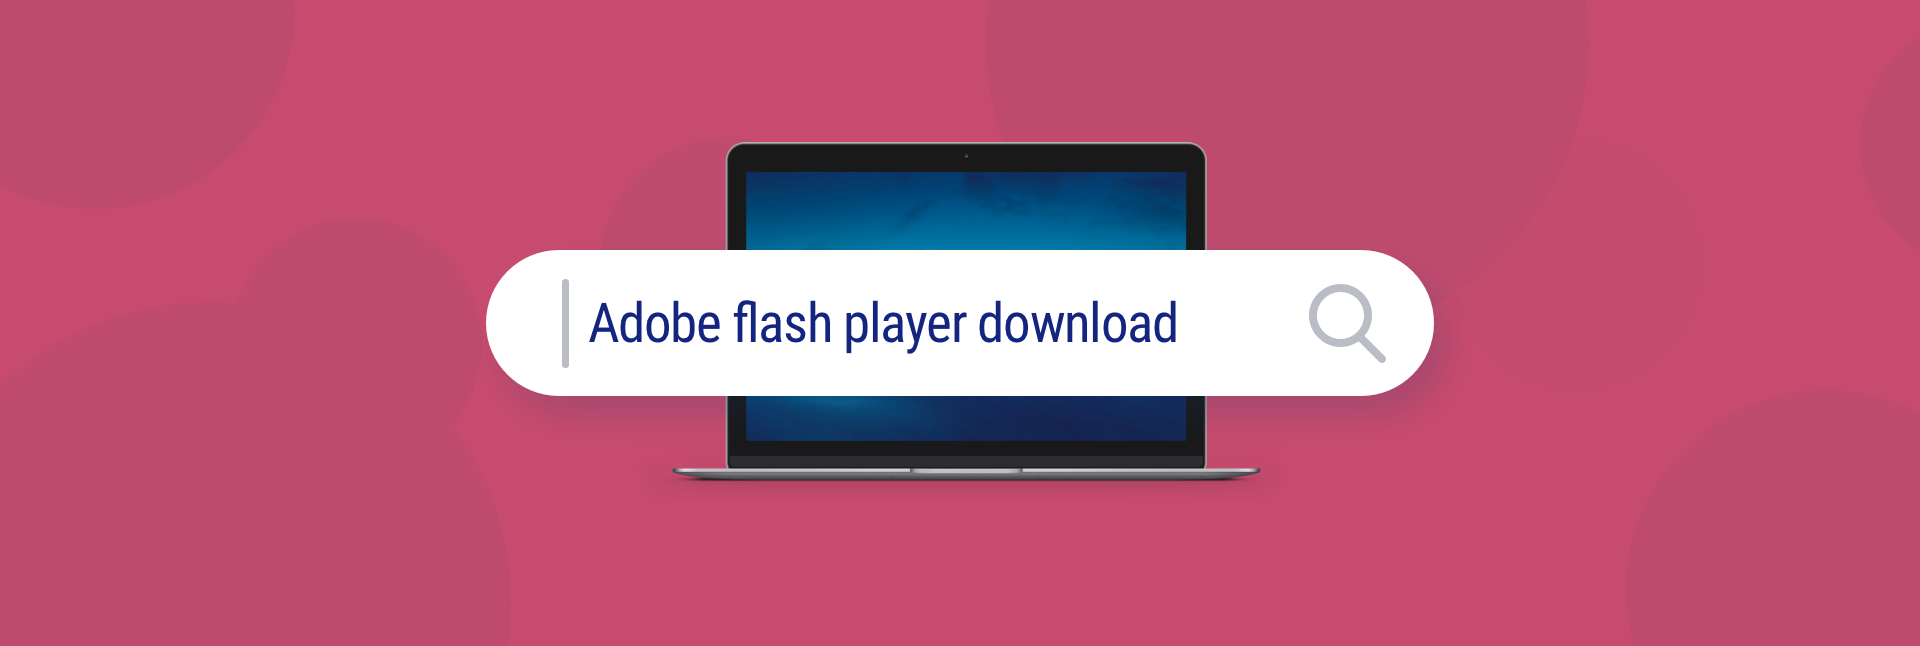 download adobe flash player chrome extension